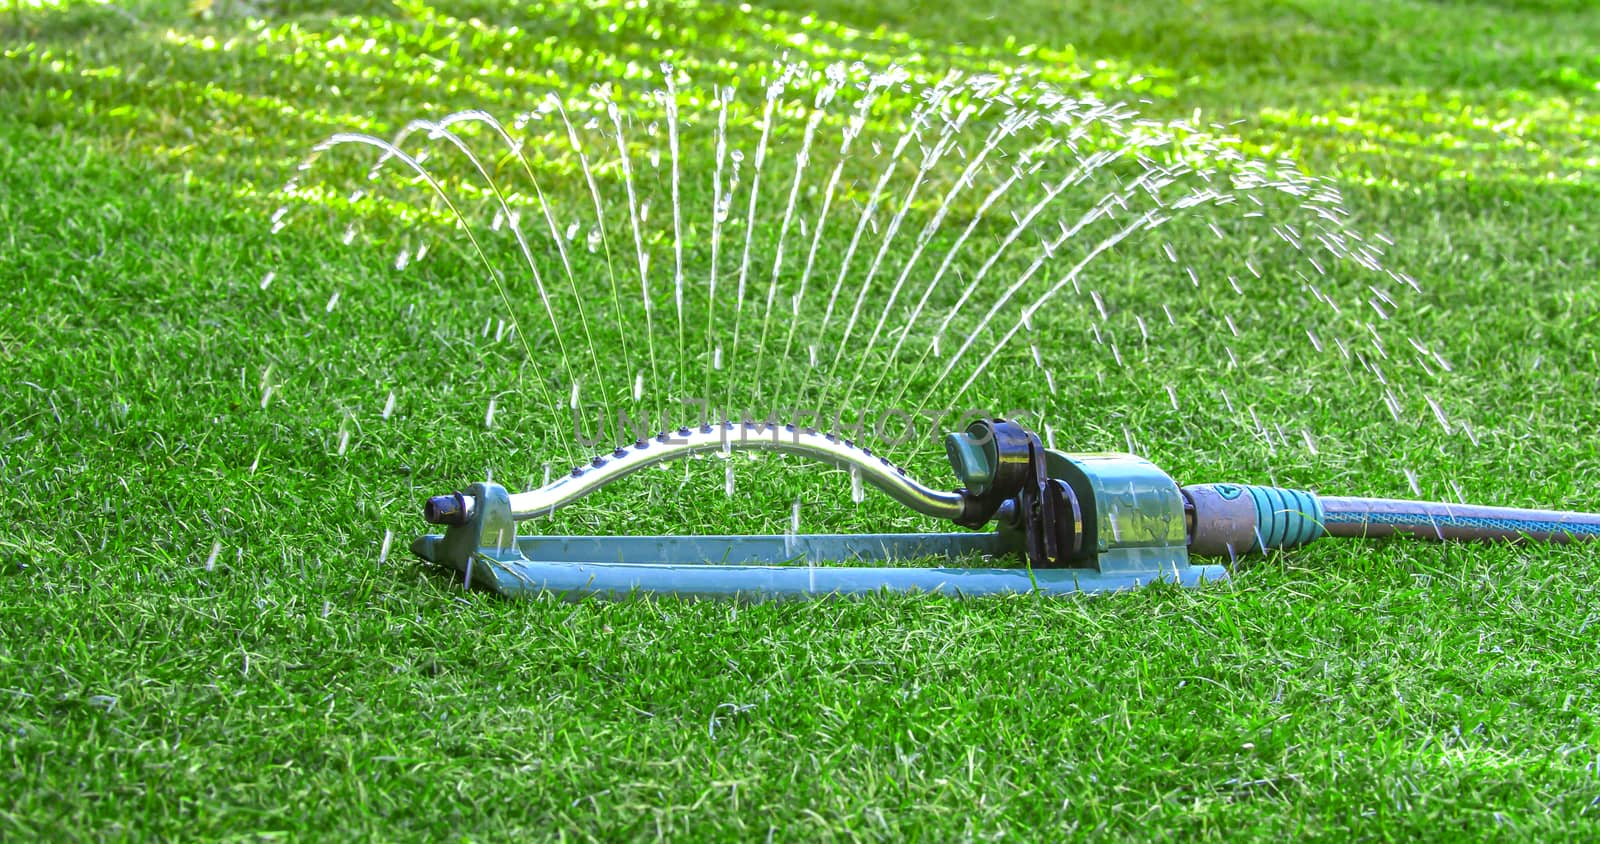 Watering green lawn during the spring with oscillating sprinkler water host by oasisamuel